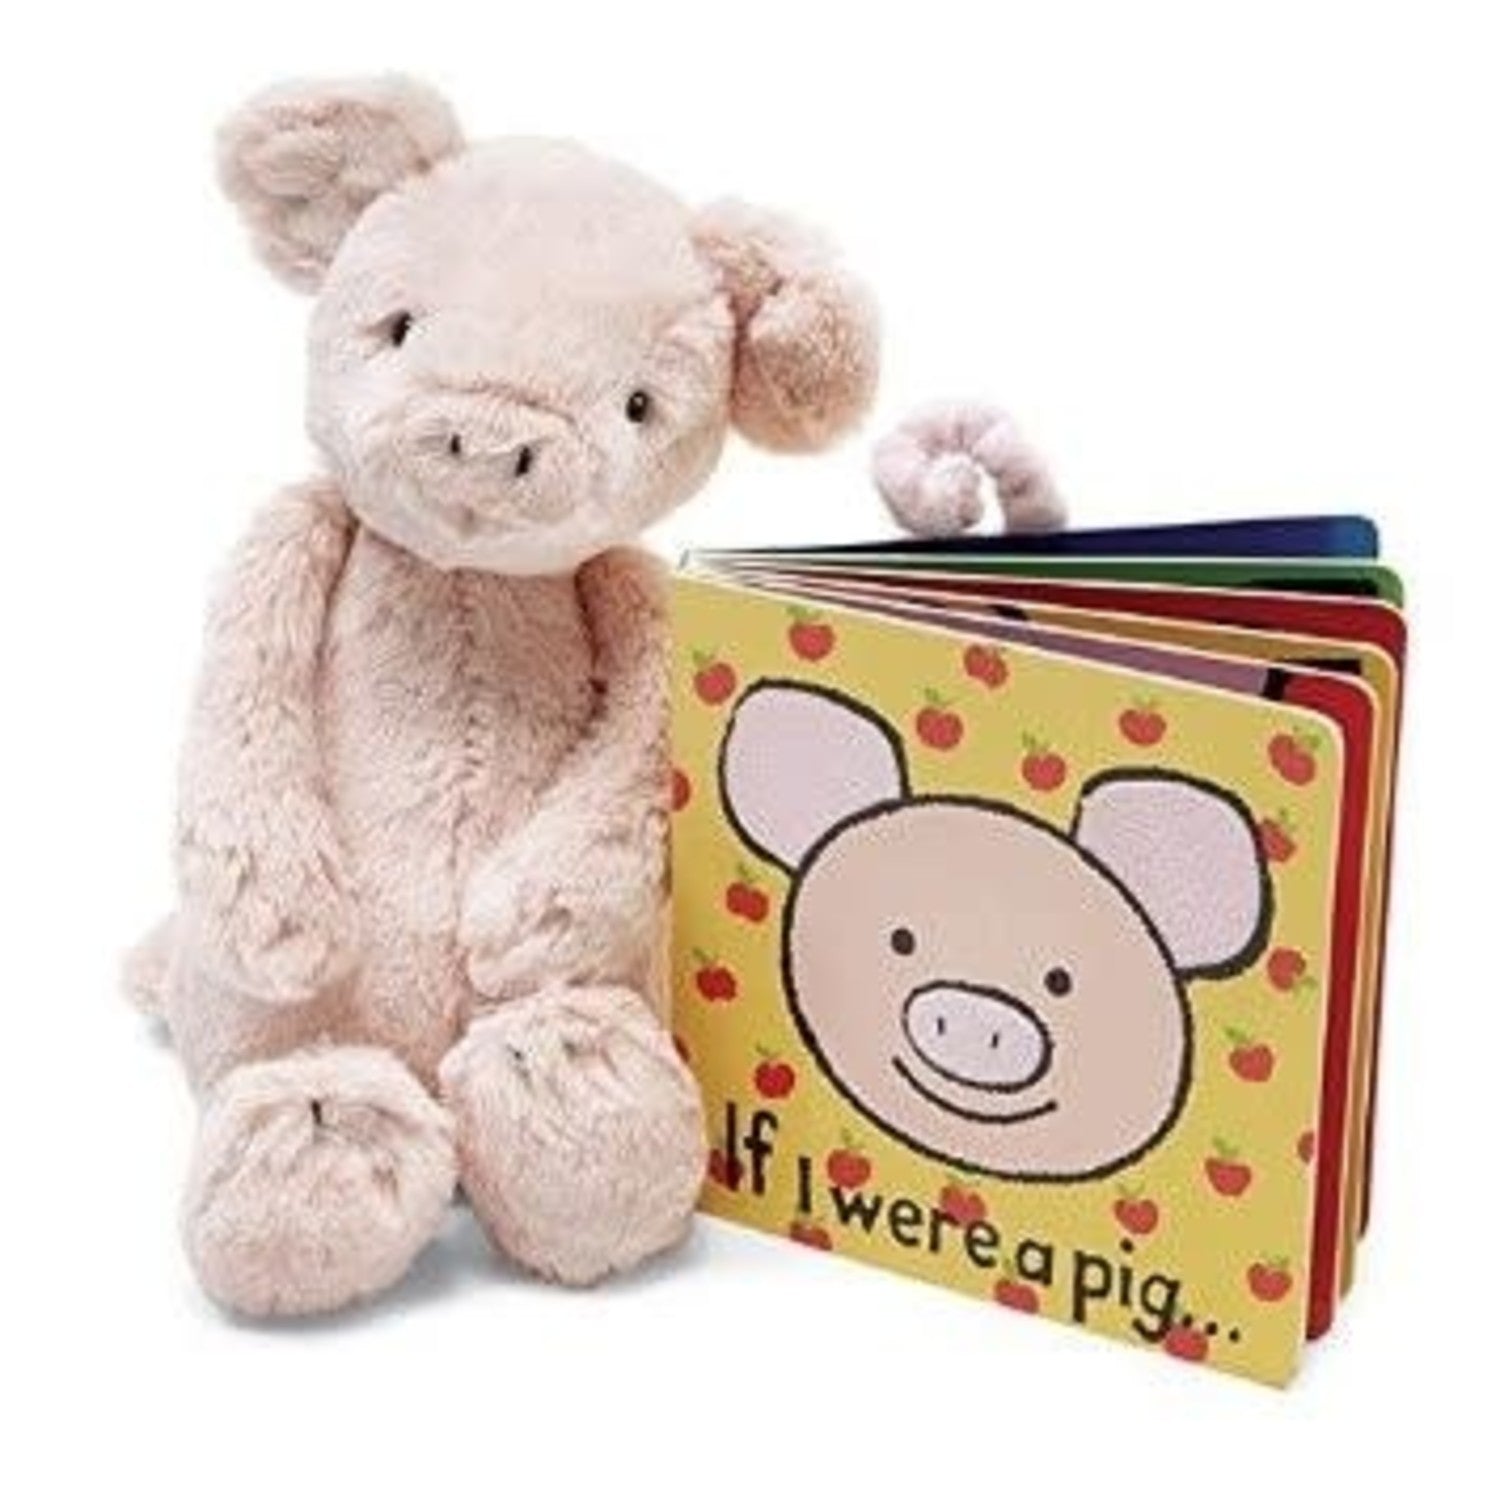 If I Were A Pig... Board Book from Jellycat